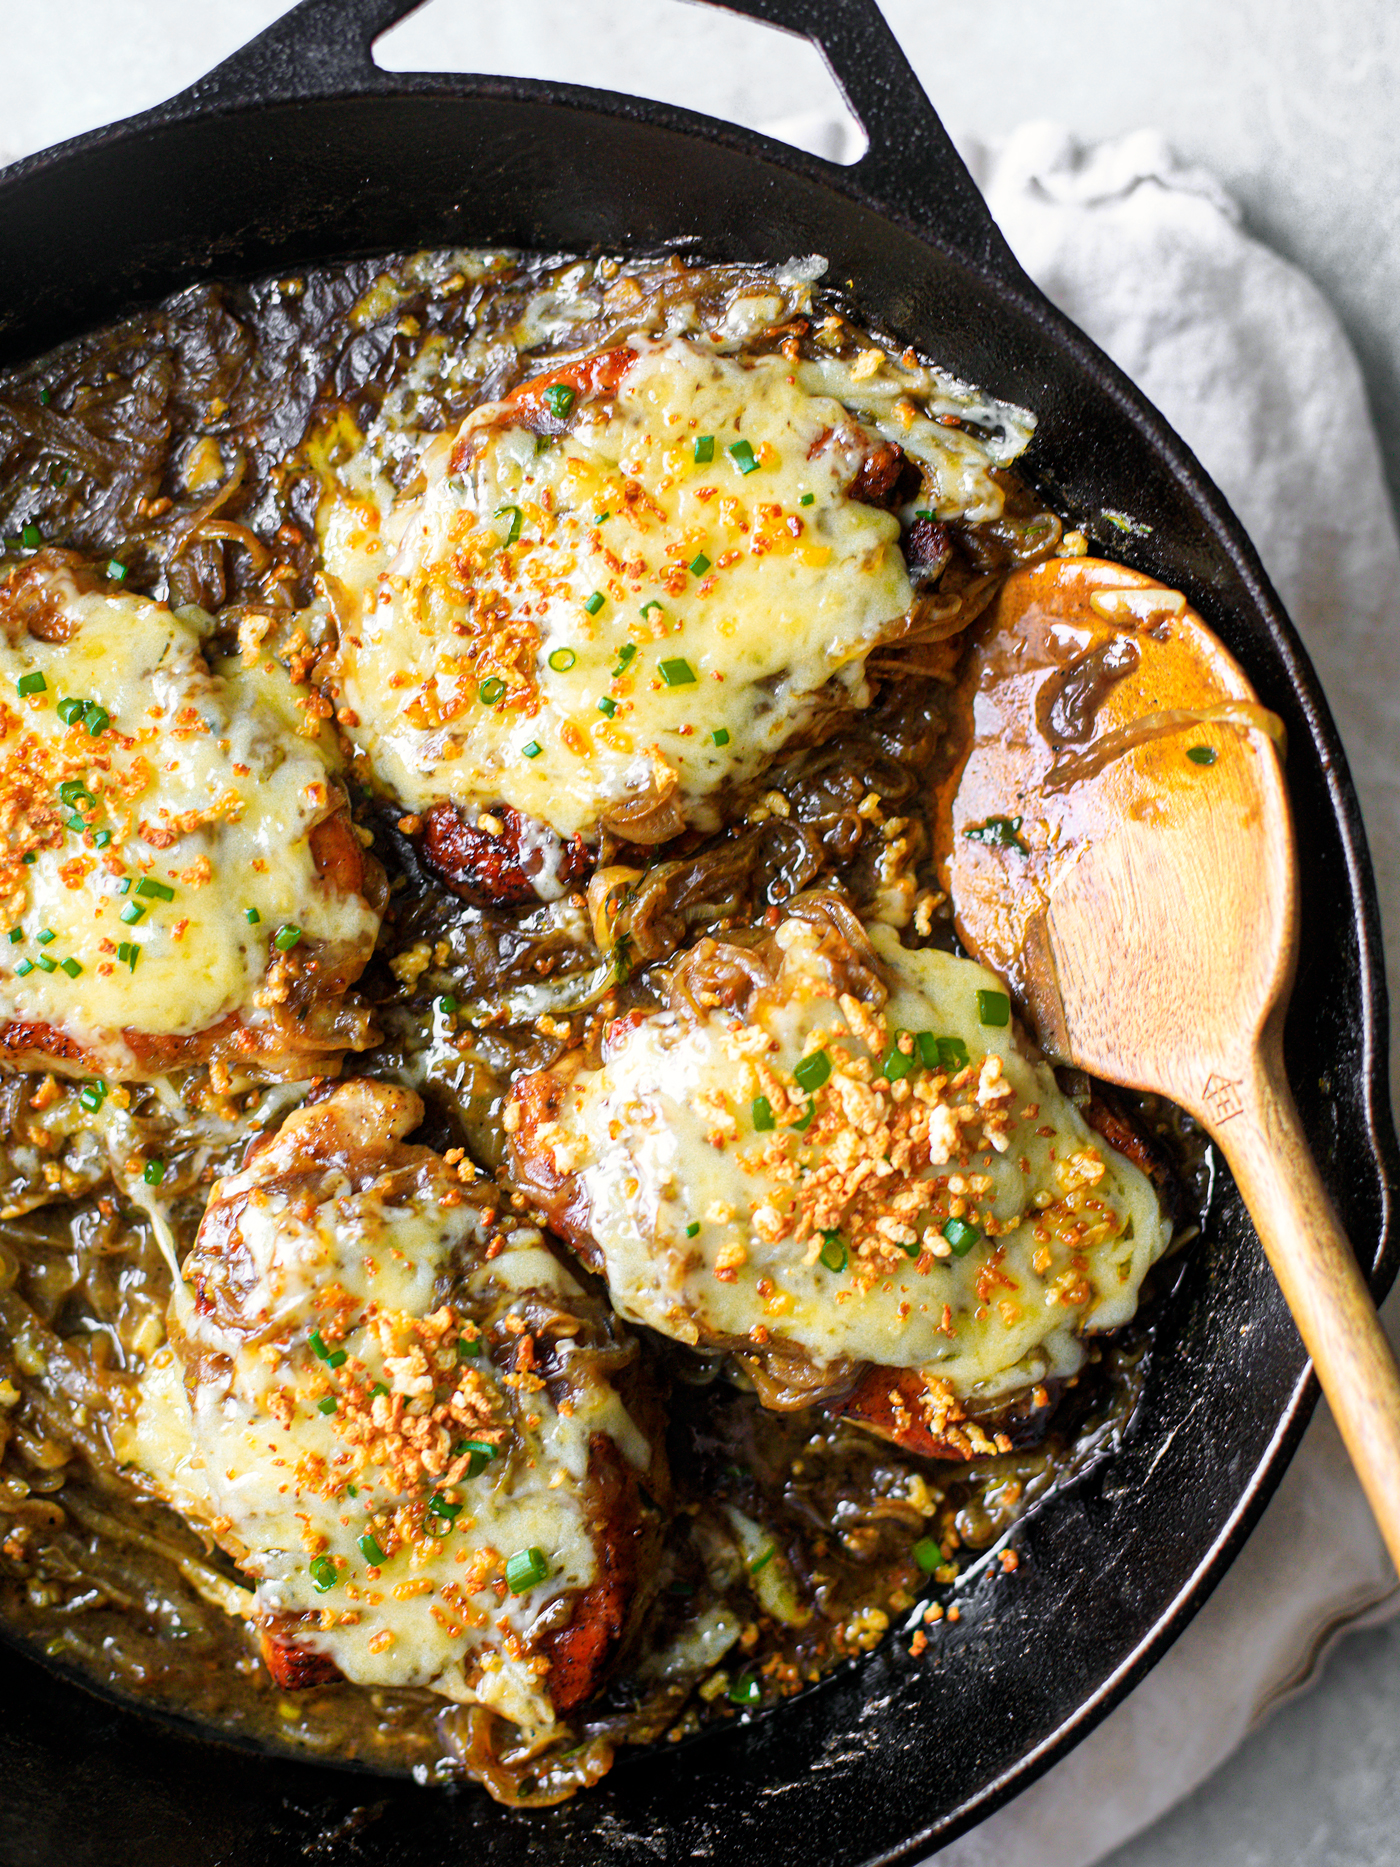 Cheesy pork chops smothered in onion gravy and topped with chives in a cast iron skillet.